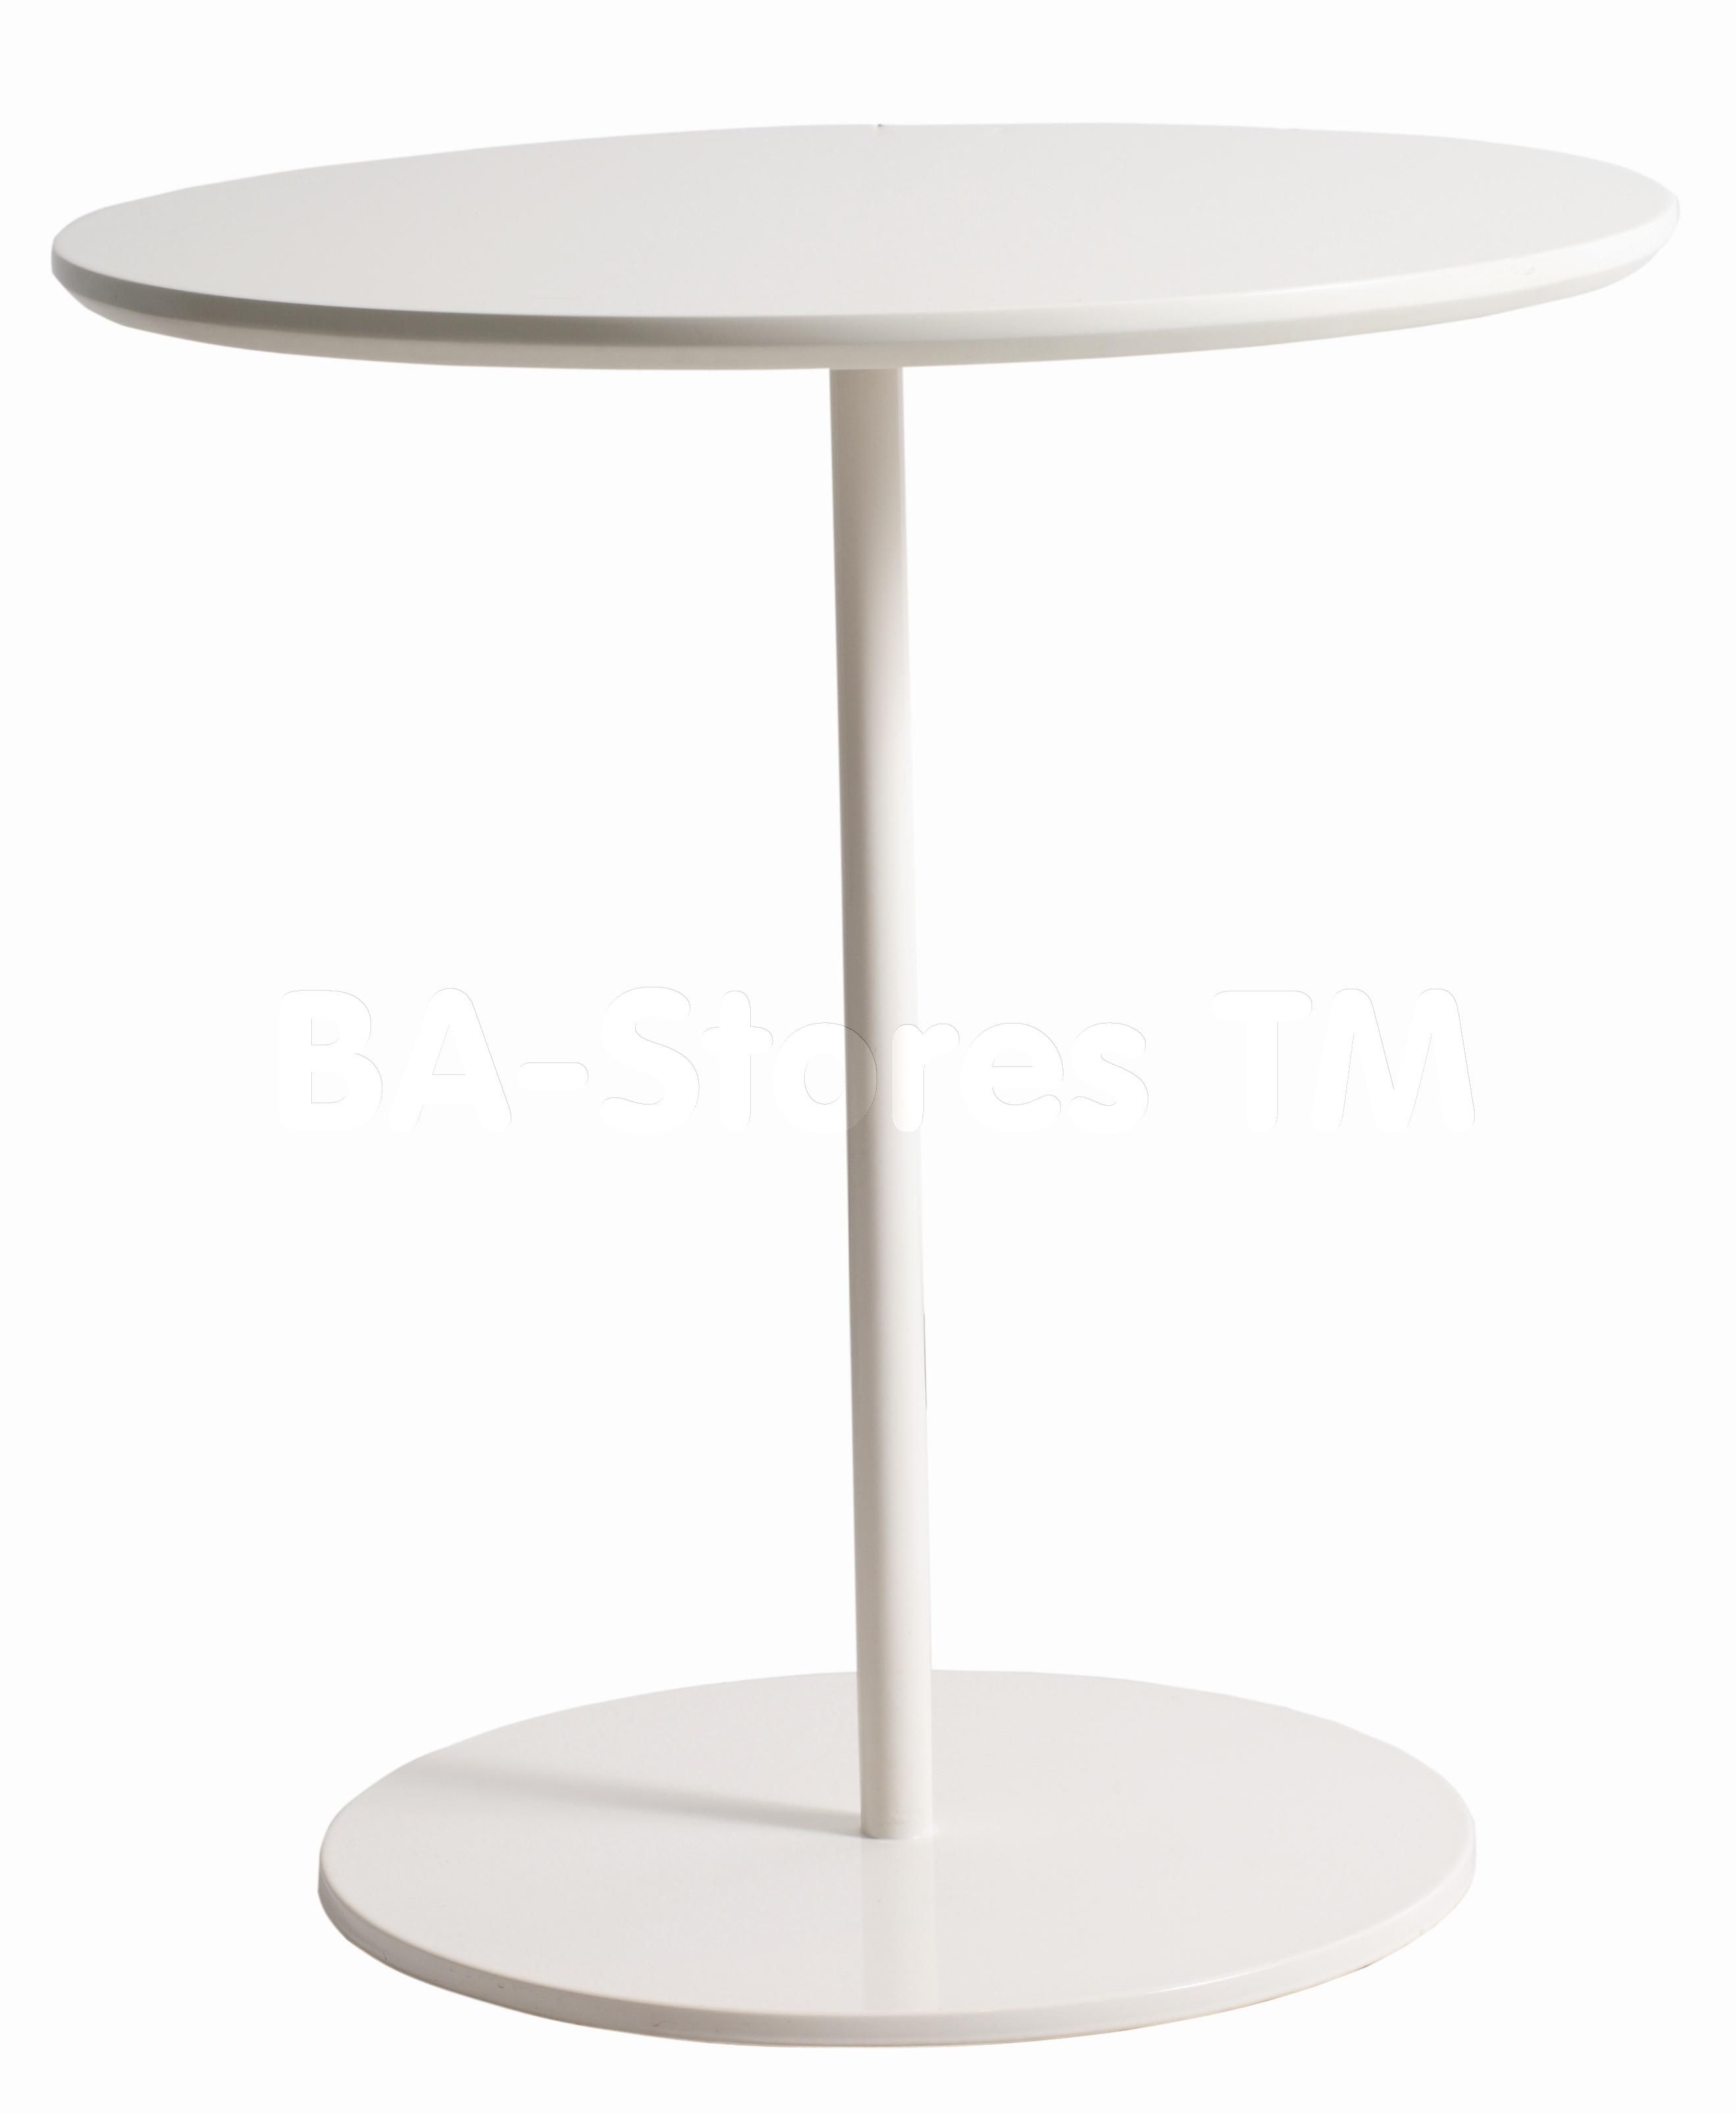 tall white table elegant round side pertaining glass accent contemporary fixed height poseur tables wood chrome black for orange home accessories nesting ikea distressed coffee